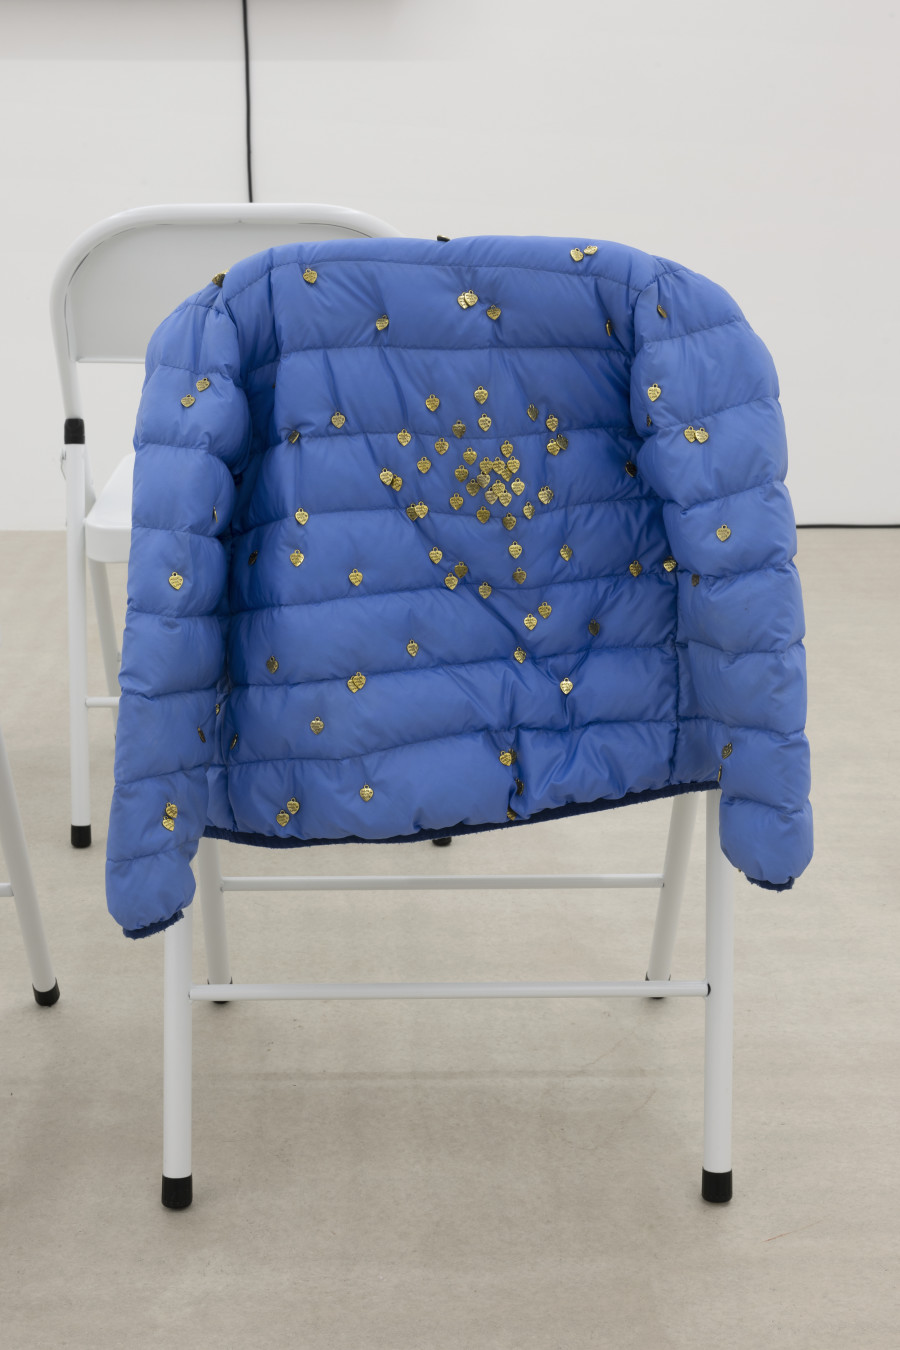 Teo Petruzzi, HAPPY FAMILY, 2023, puffer jackets, embroidery, heart pendants, 73 × 40 × 18 cm. Photography: Gina Folly / all images copyright and courtesy of the artist and For, Basel